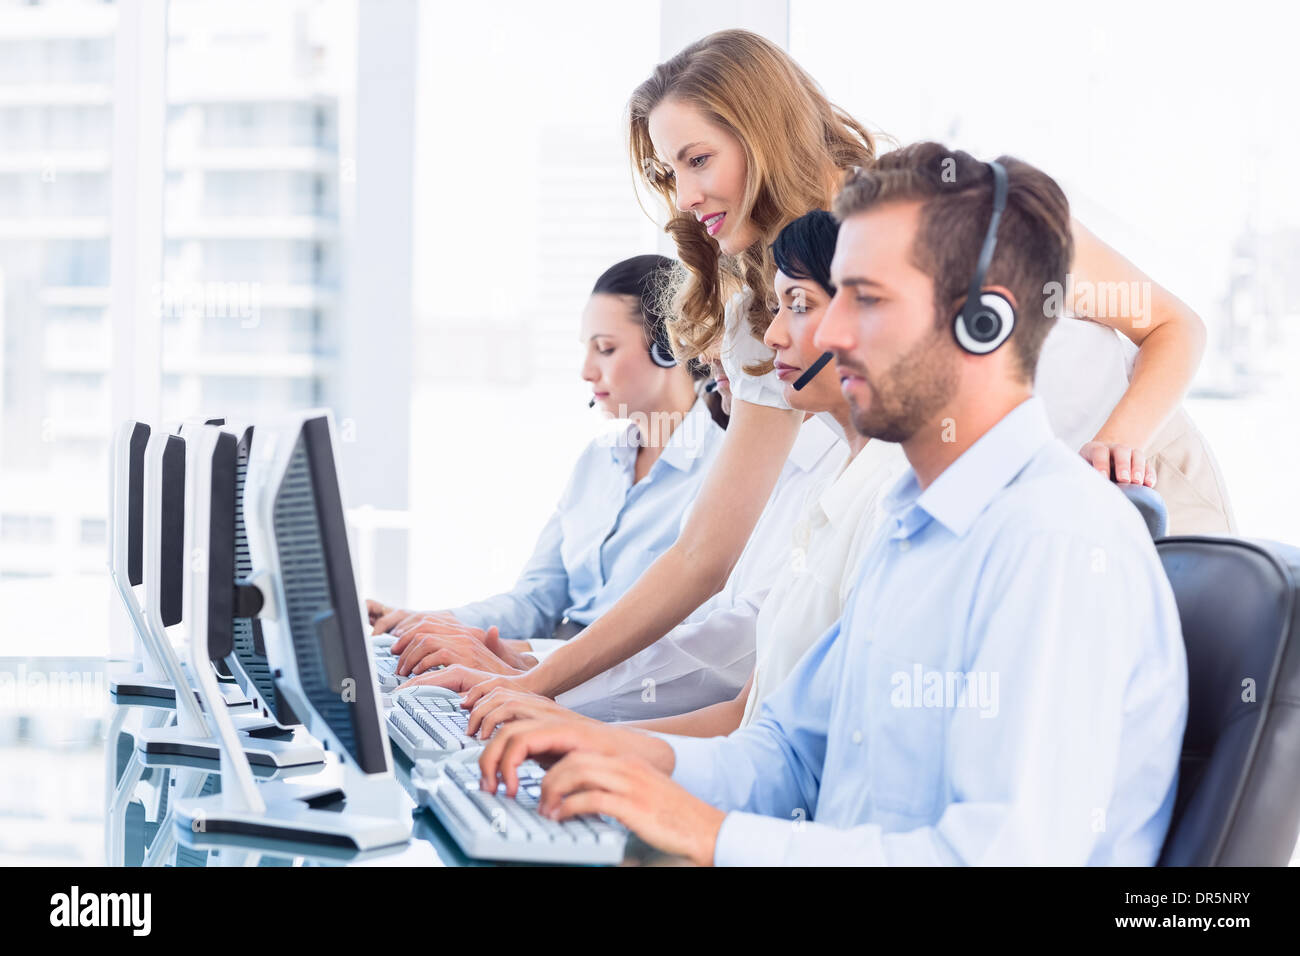 Manager and executives with headsets using computers Stock Photo